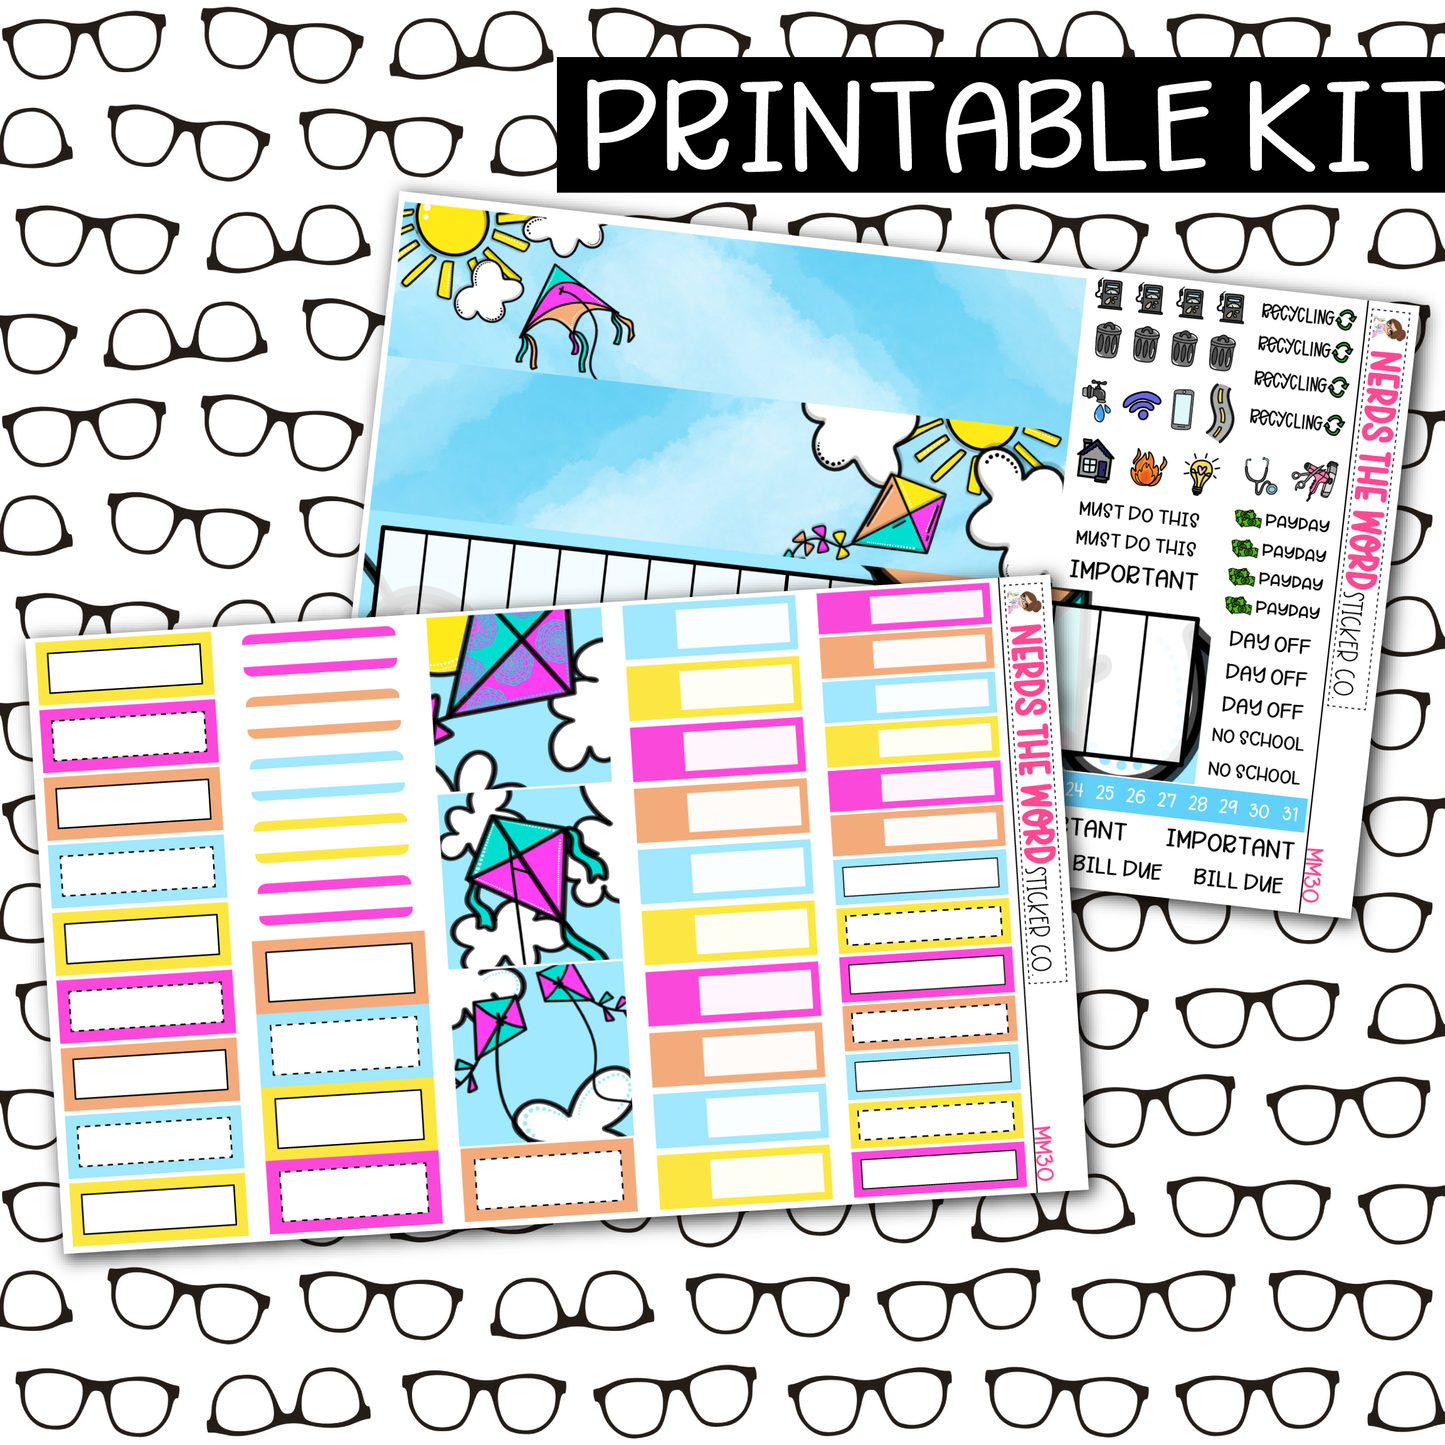 PRINTABLE Kite Monthly Kit - Choose your Size